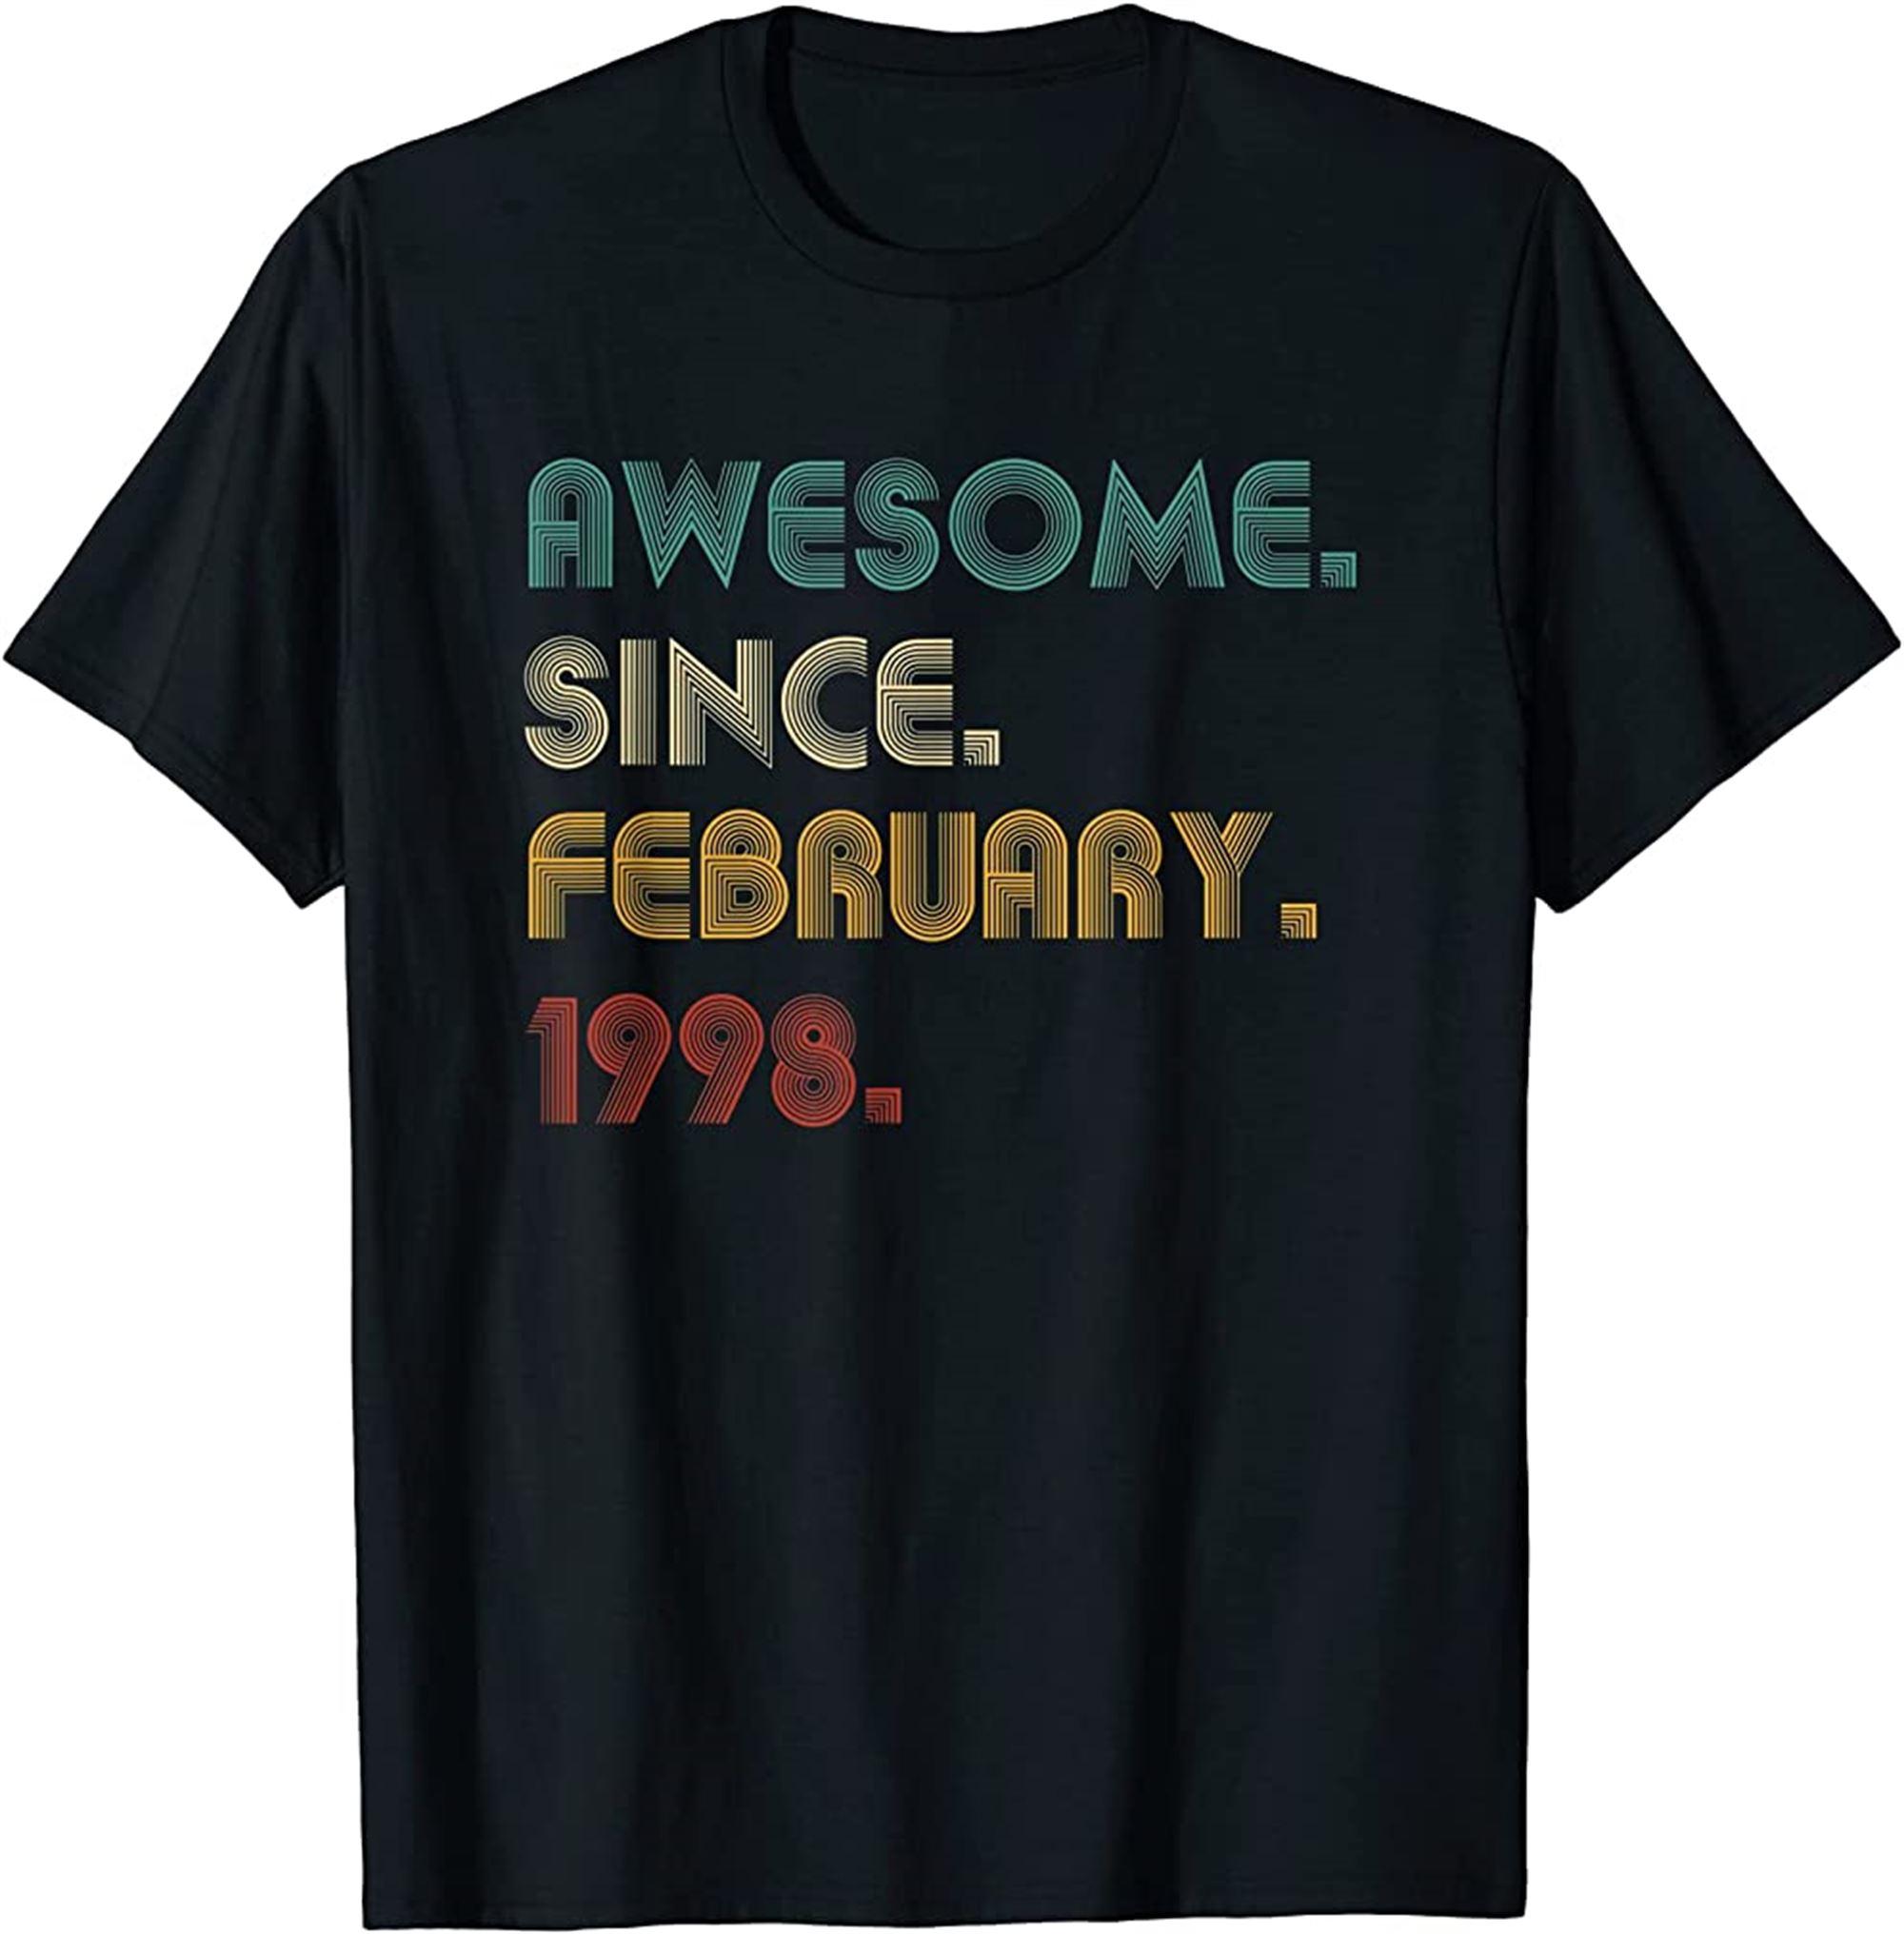 24 Year Old Awesome Since February 1998 Gifts 24th Birthday T-shirt Full Size Up To 5xl